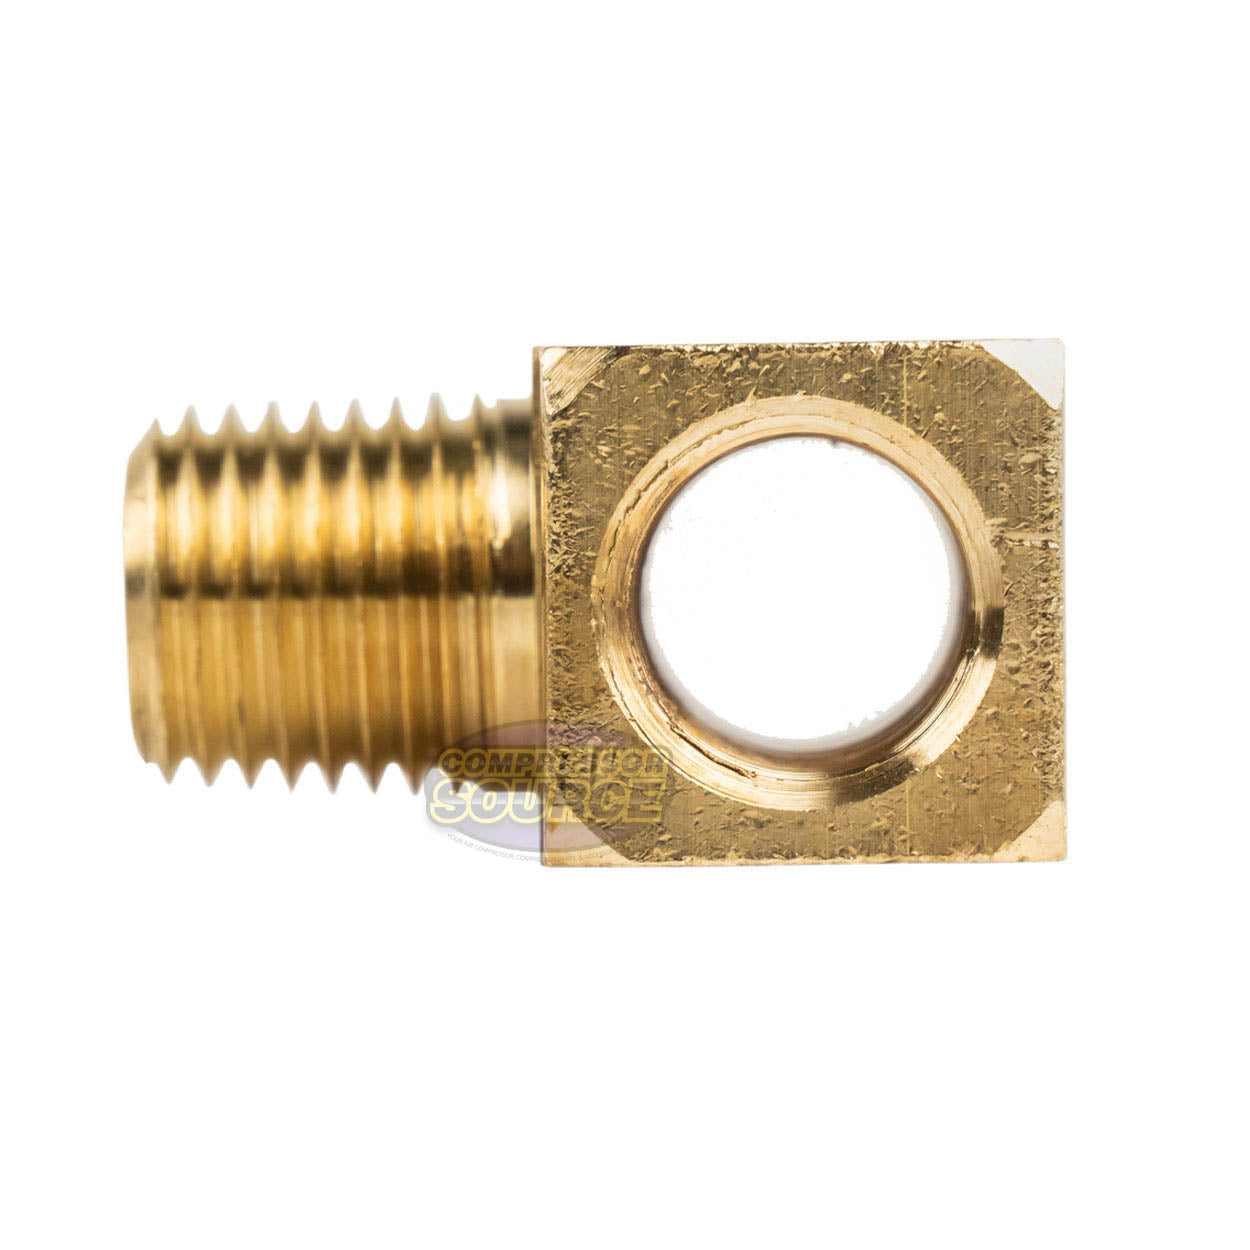 5 Pack 1/4" Male NPT x (2) 1/4" Female NPT Branch Tee Brass Union Tee Pipe Connector